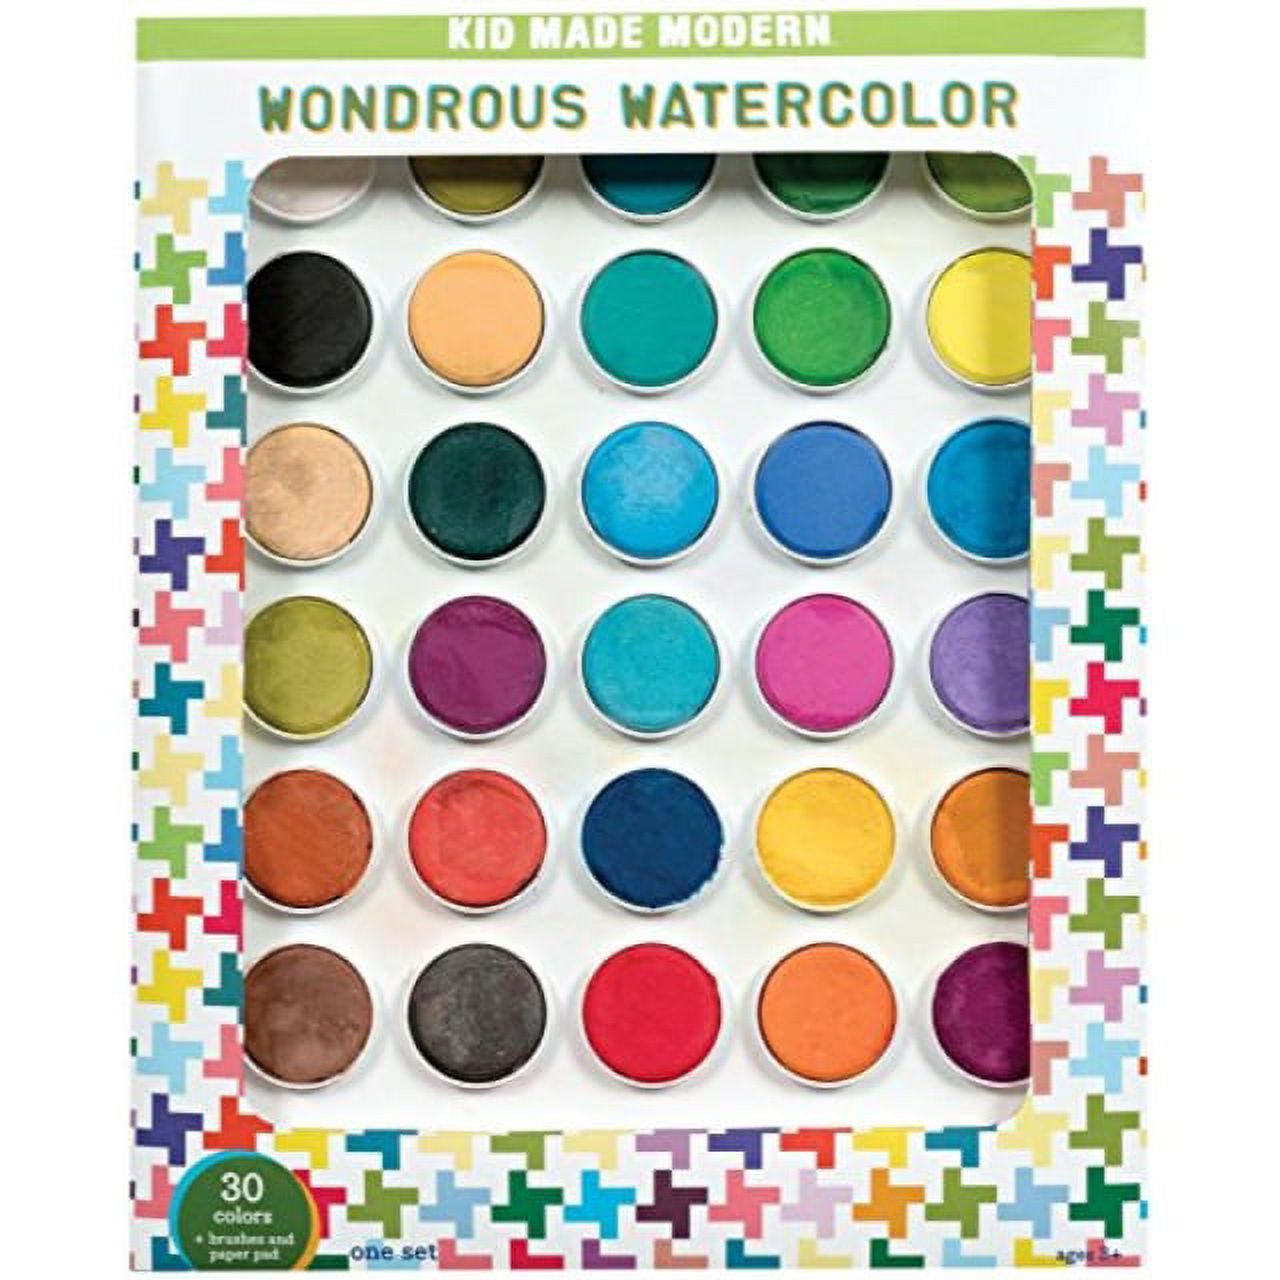 Kid Made Modern Wondrous Watercolor Kit - Kids Arts and Crafts Painting Supplies (30 Colors) - image 1 of 3